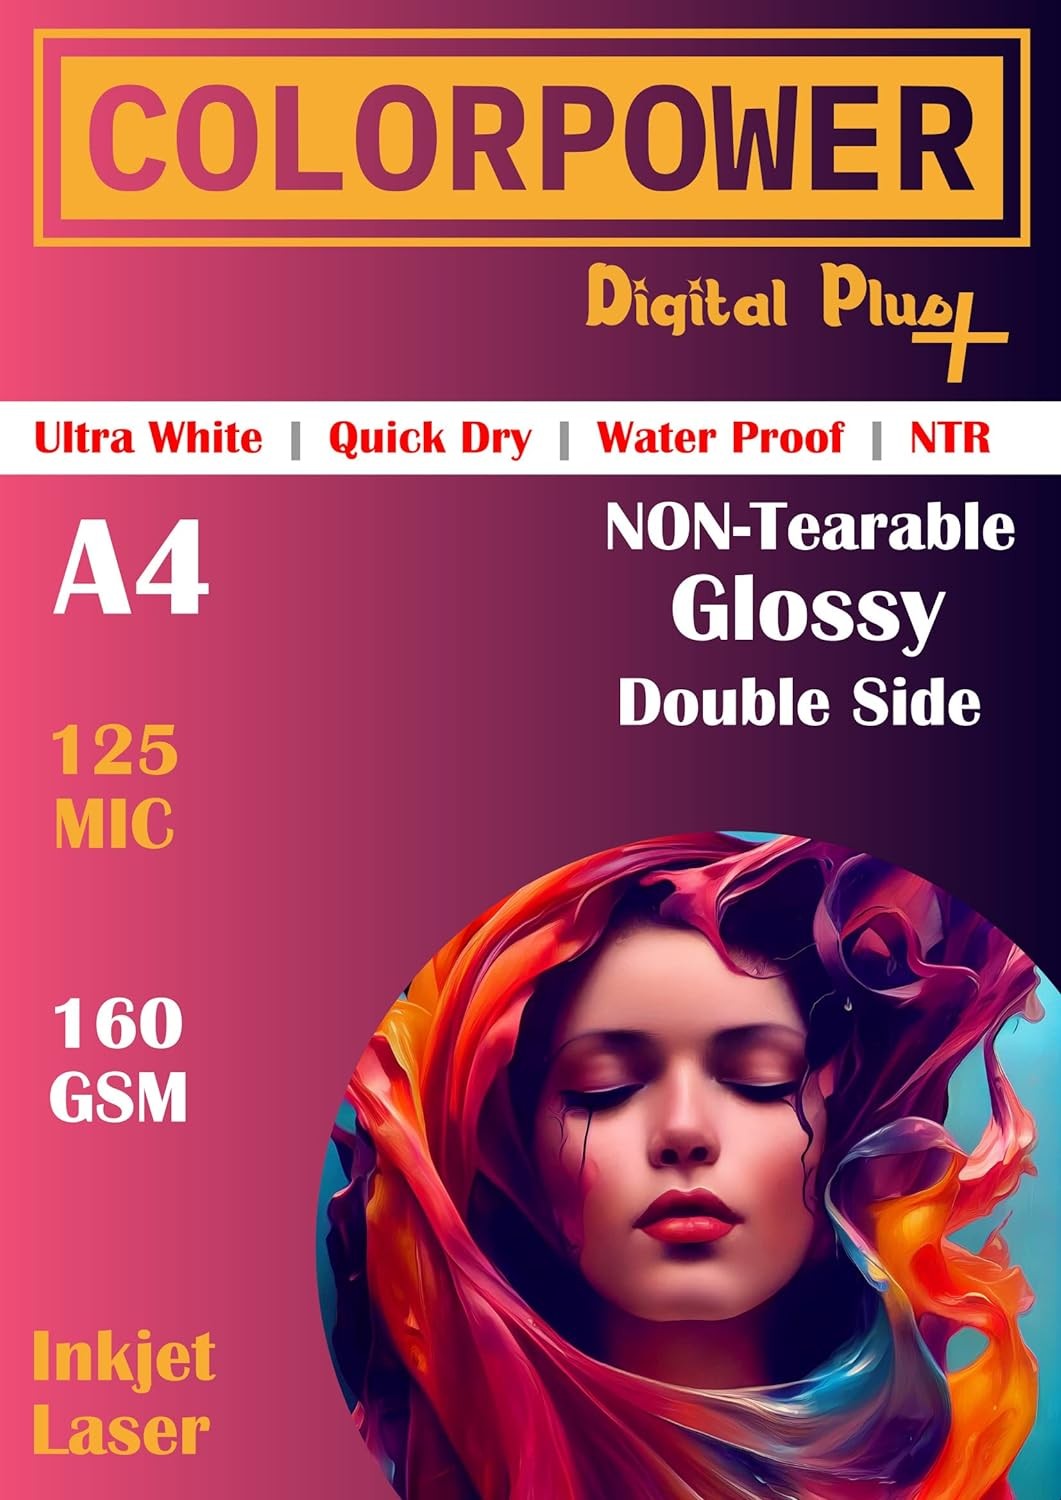 ColorPower A4 Photo Glossy Non-Tearable Paper Ntr (Both Side Coated/Printable) 125 Microns / 160 Gsm For Digital, Inkjet And Laserjet (Pack of 10Pcs)